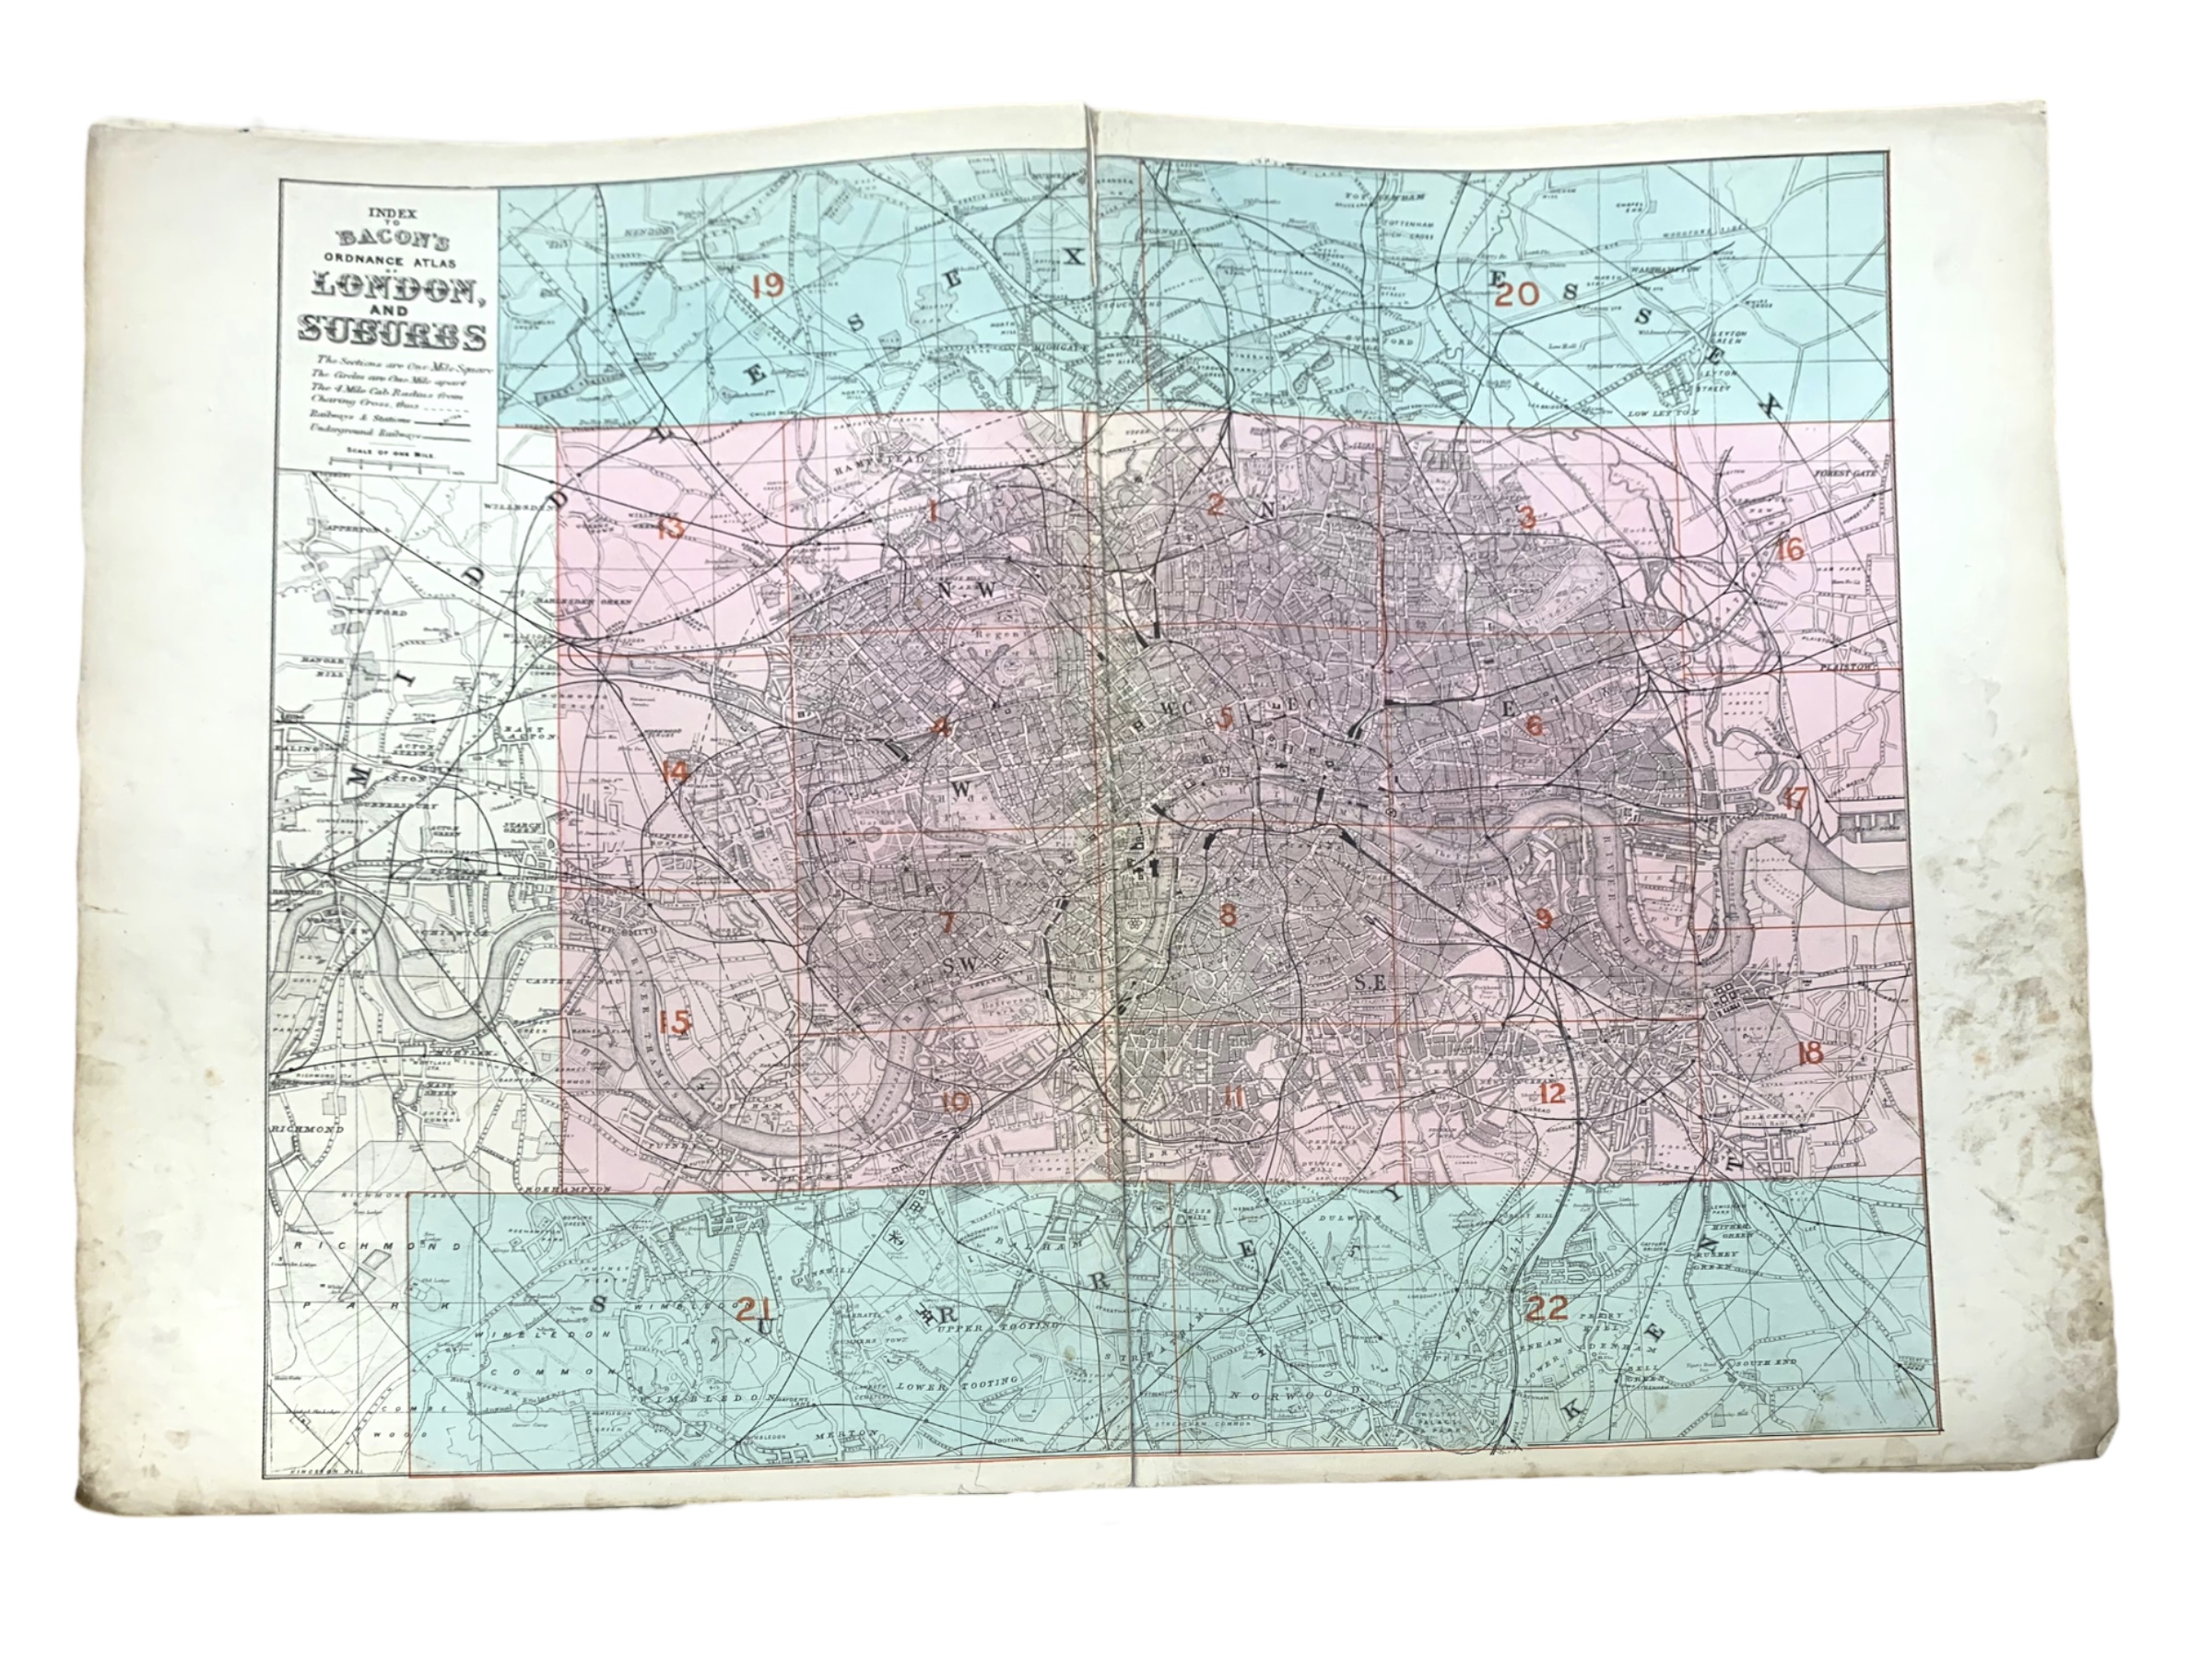 Bacon's New Ordnance Survey Atlas of London and Suburbs, c. 1880 - Image 4 of 7